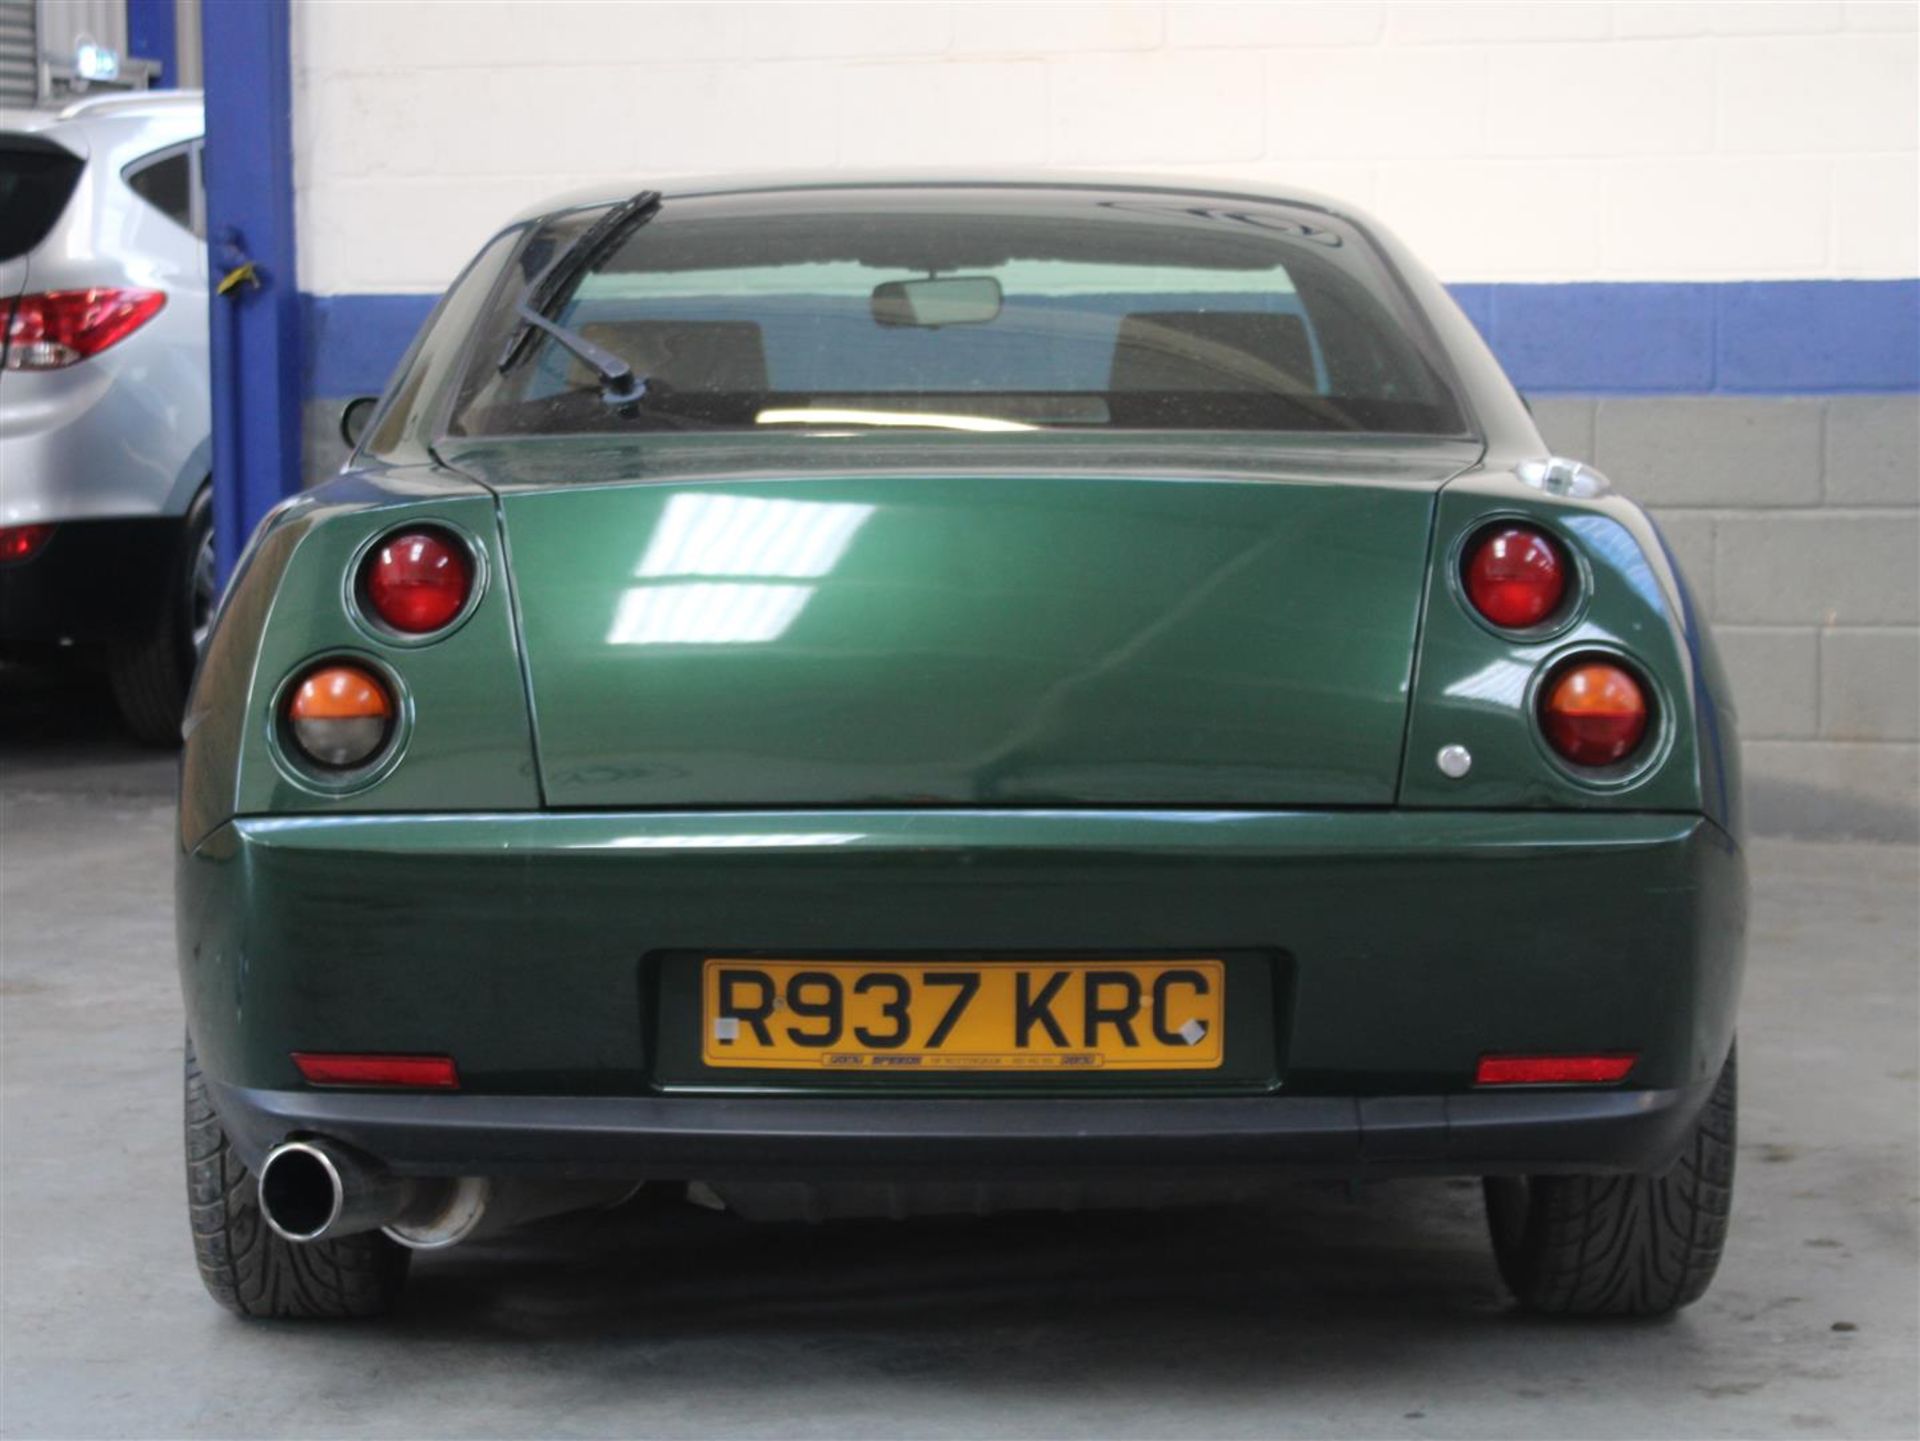 1997 Fiat Coupe 20V Turbo - Image 15 of 25